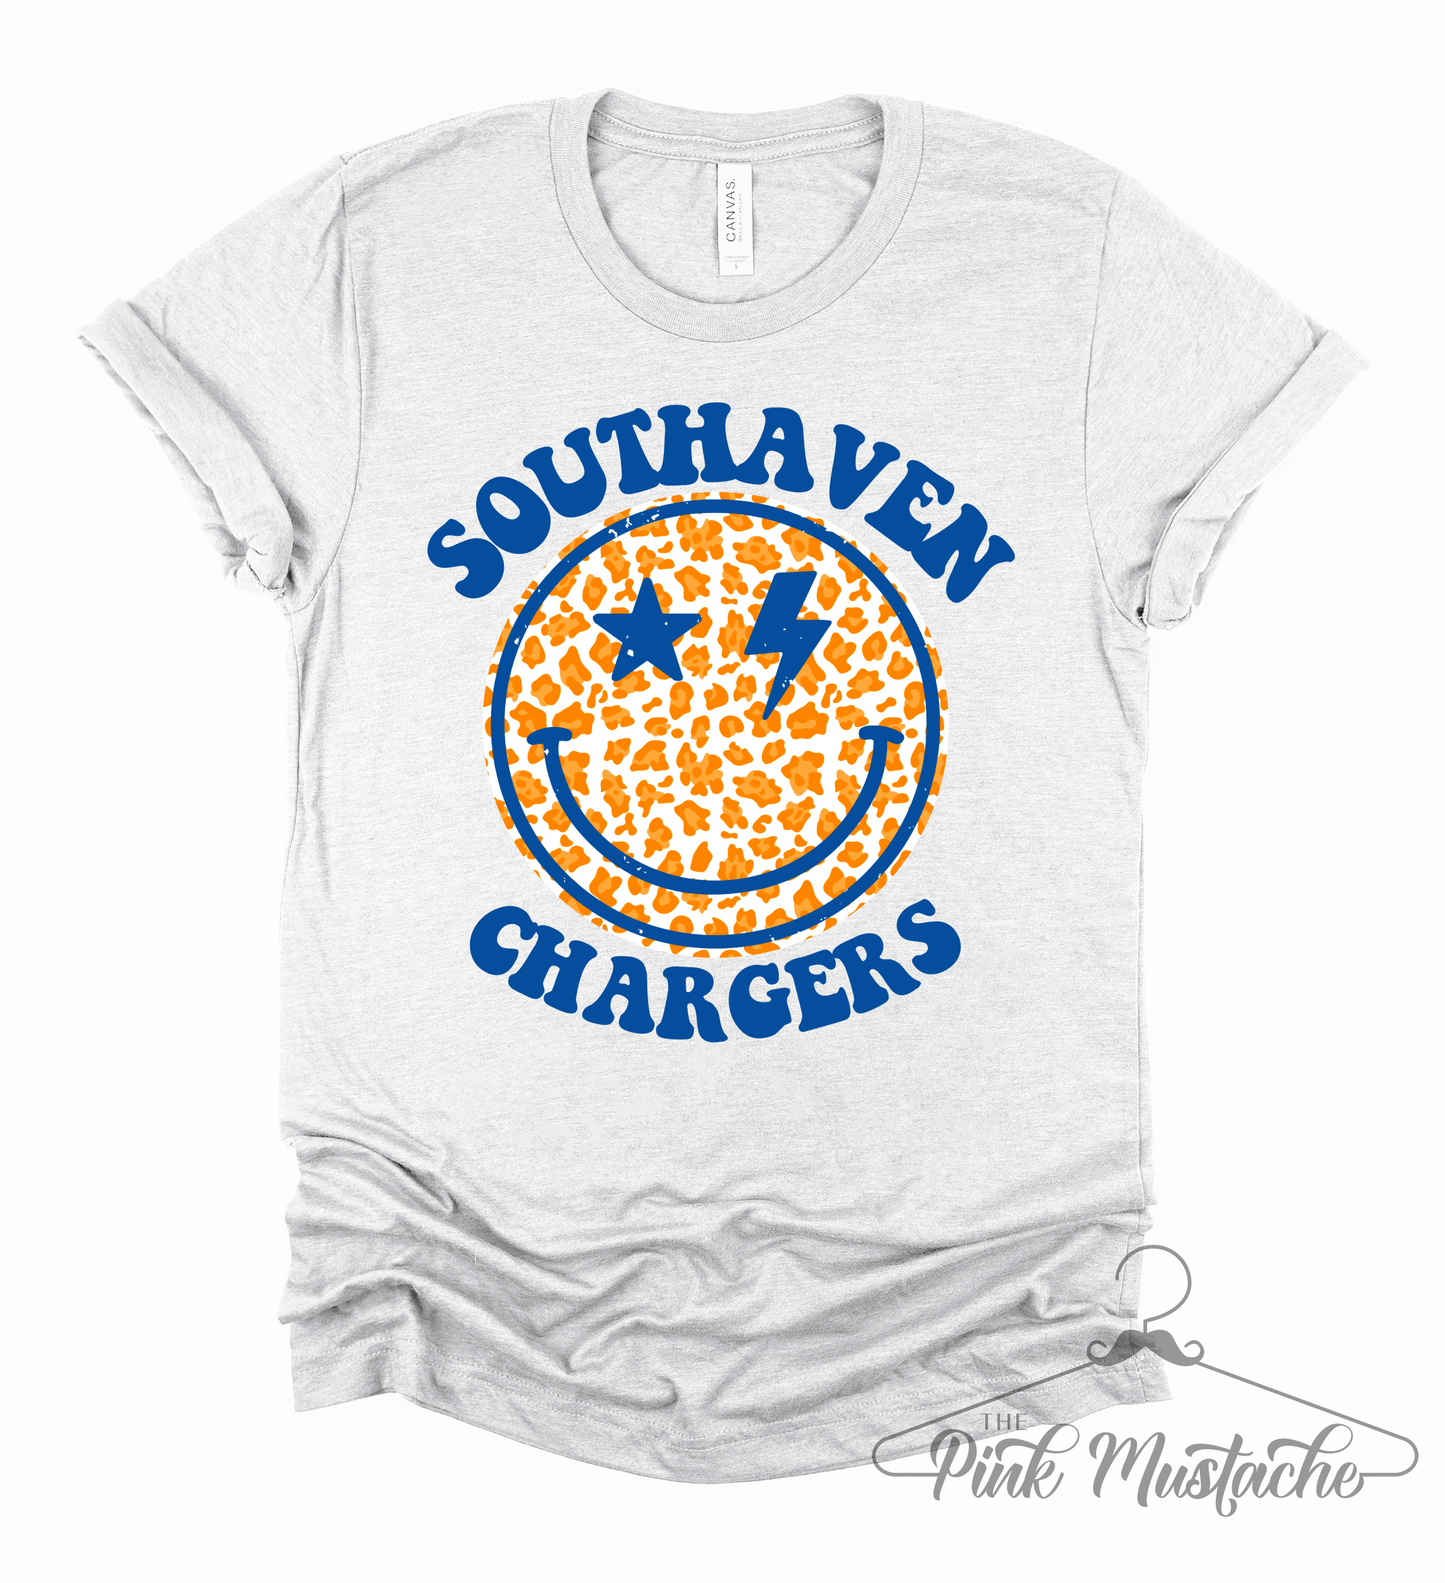 Southaven Chargers Distressed Smiley Unisex Shirt / Toddler, Youth, and Adult Sizes